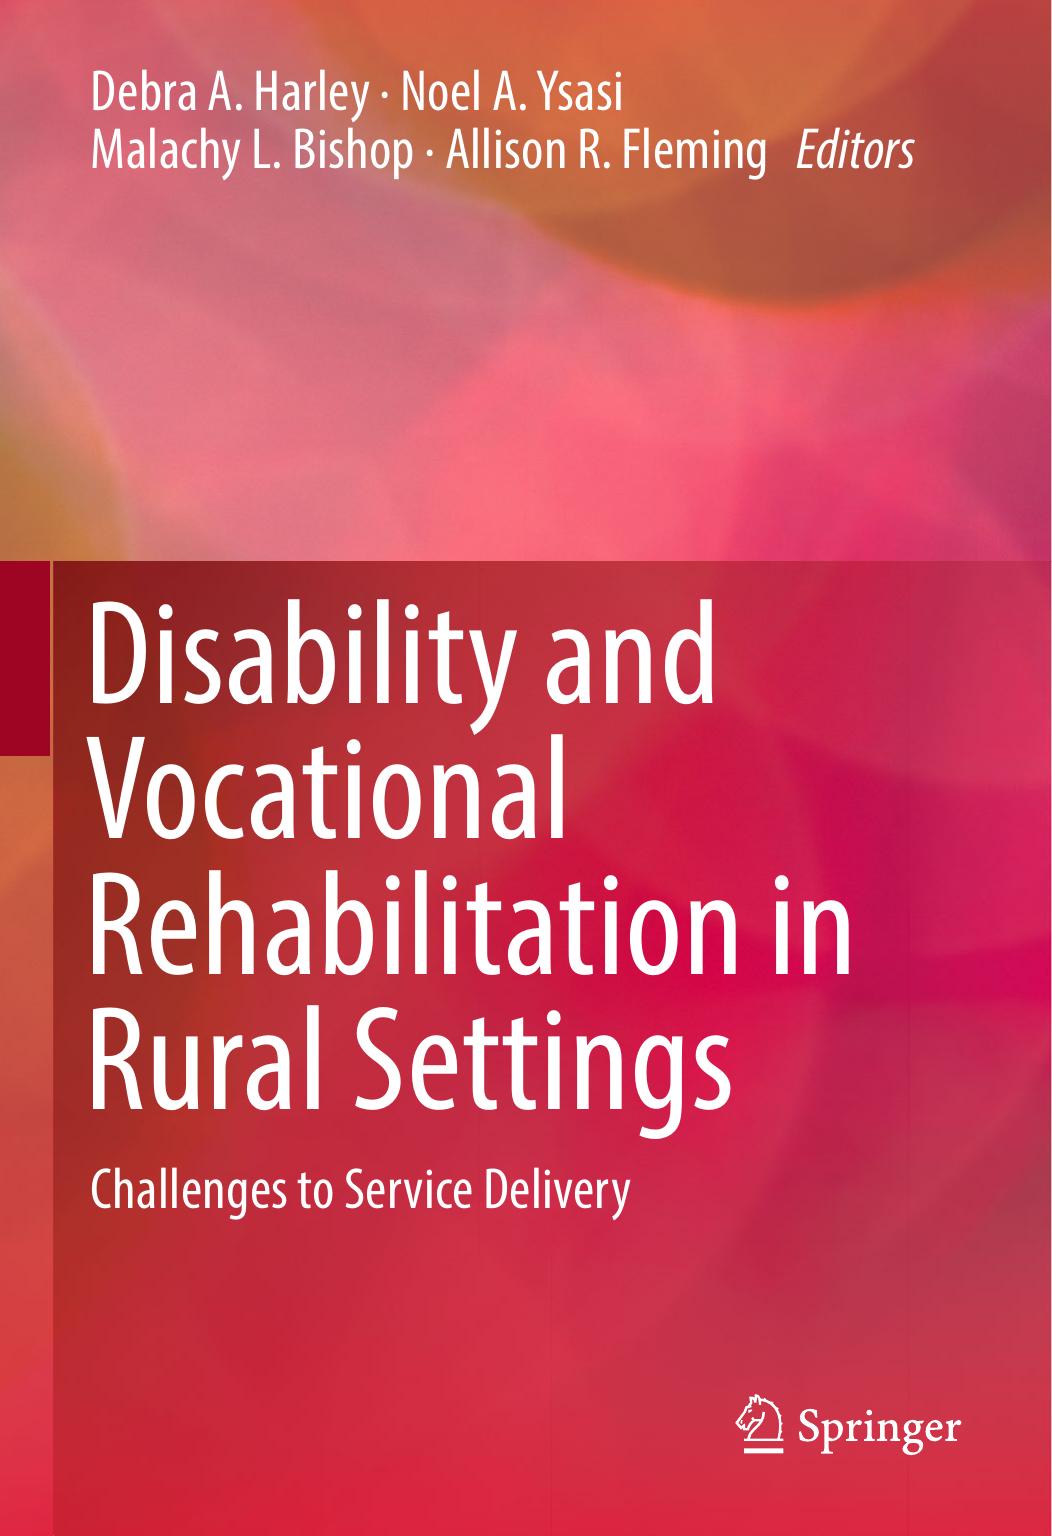 11 Disability and Vocational Rehabilitation in Rural Settings  Challenges to Service Delivery 2018